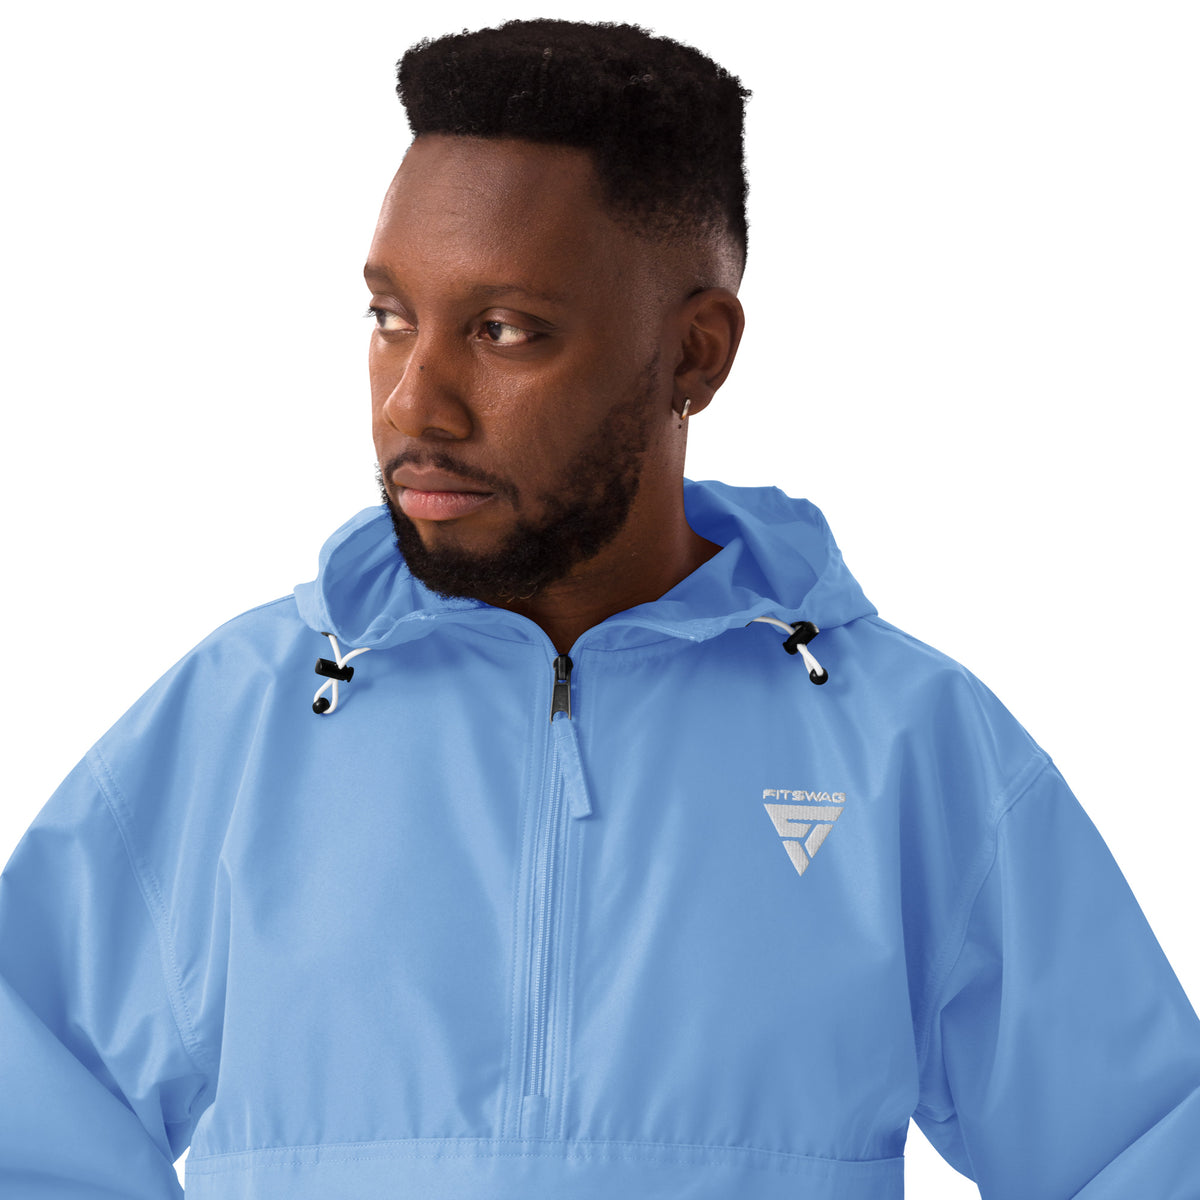 Men's Embroidered Champion Packable Jacket - FITSWAG APPAREL